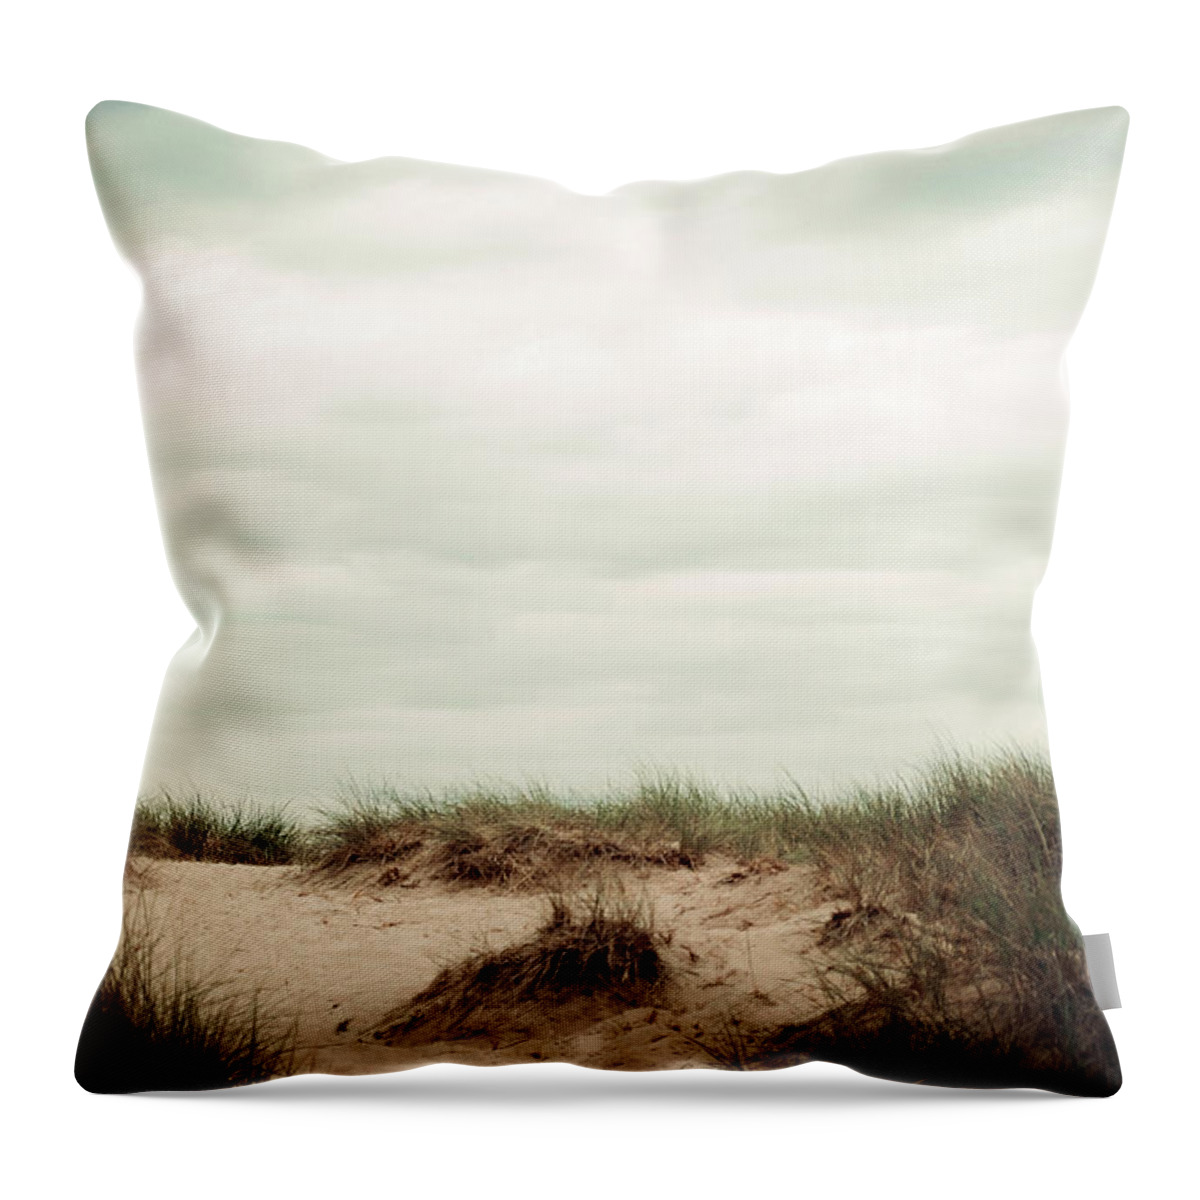 Sand Dunes Throw Pillow featuring the photograph Beaches by Michelle Wermuth